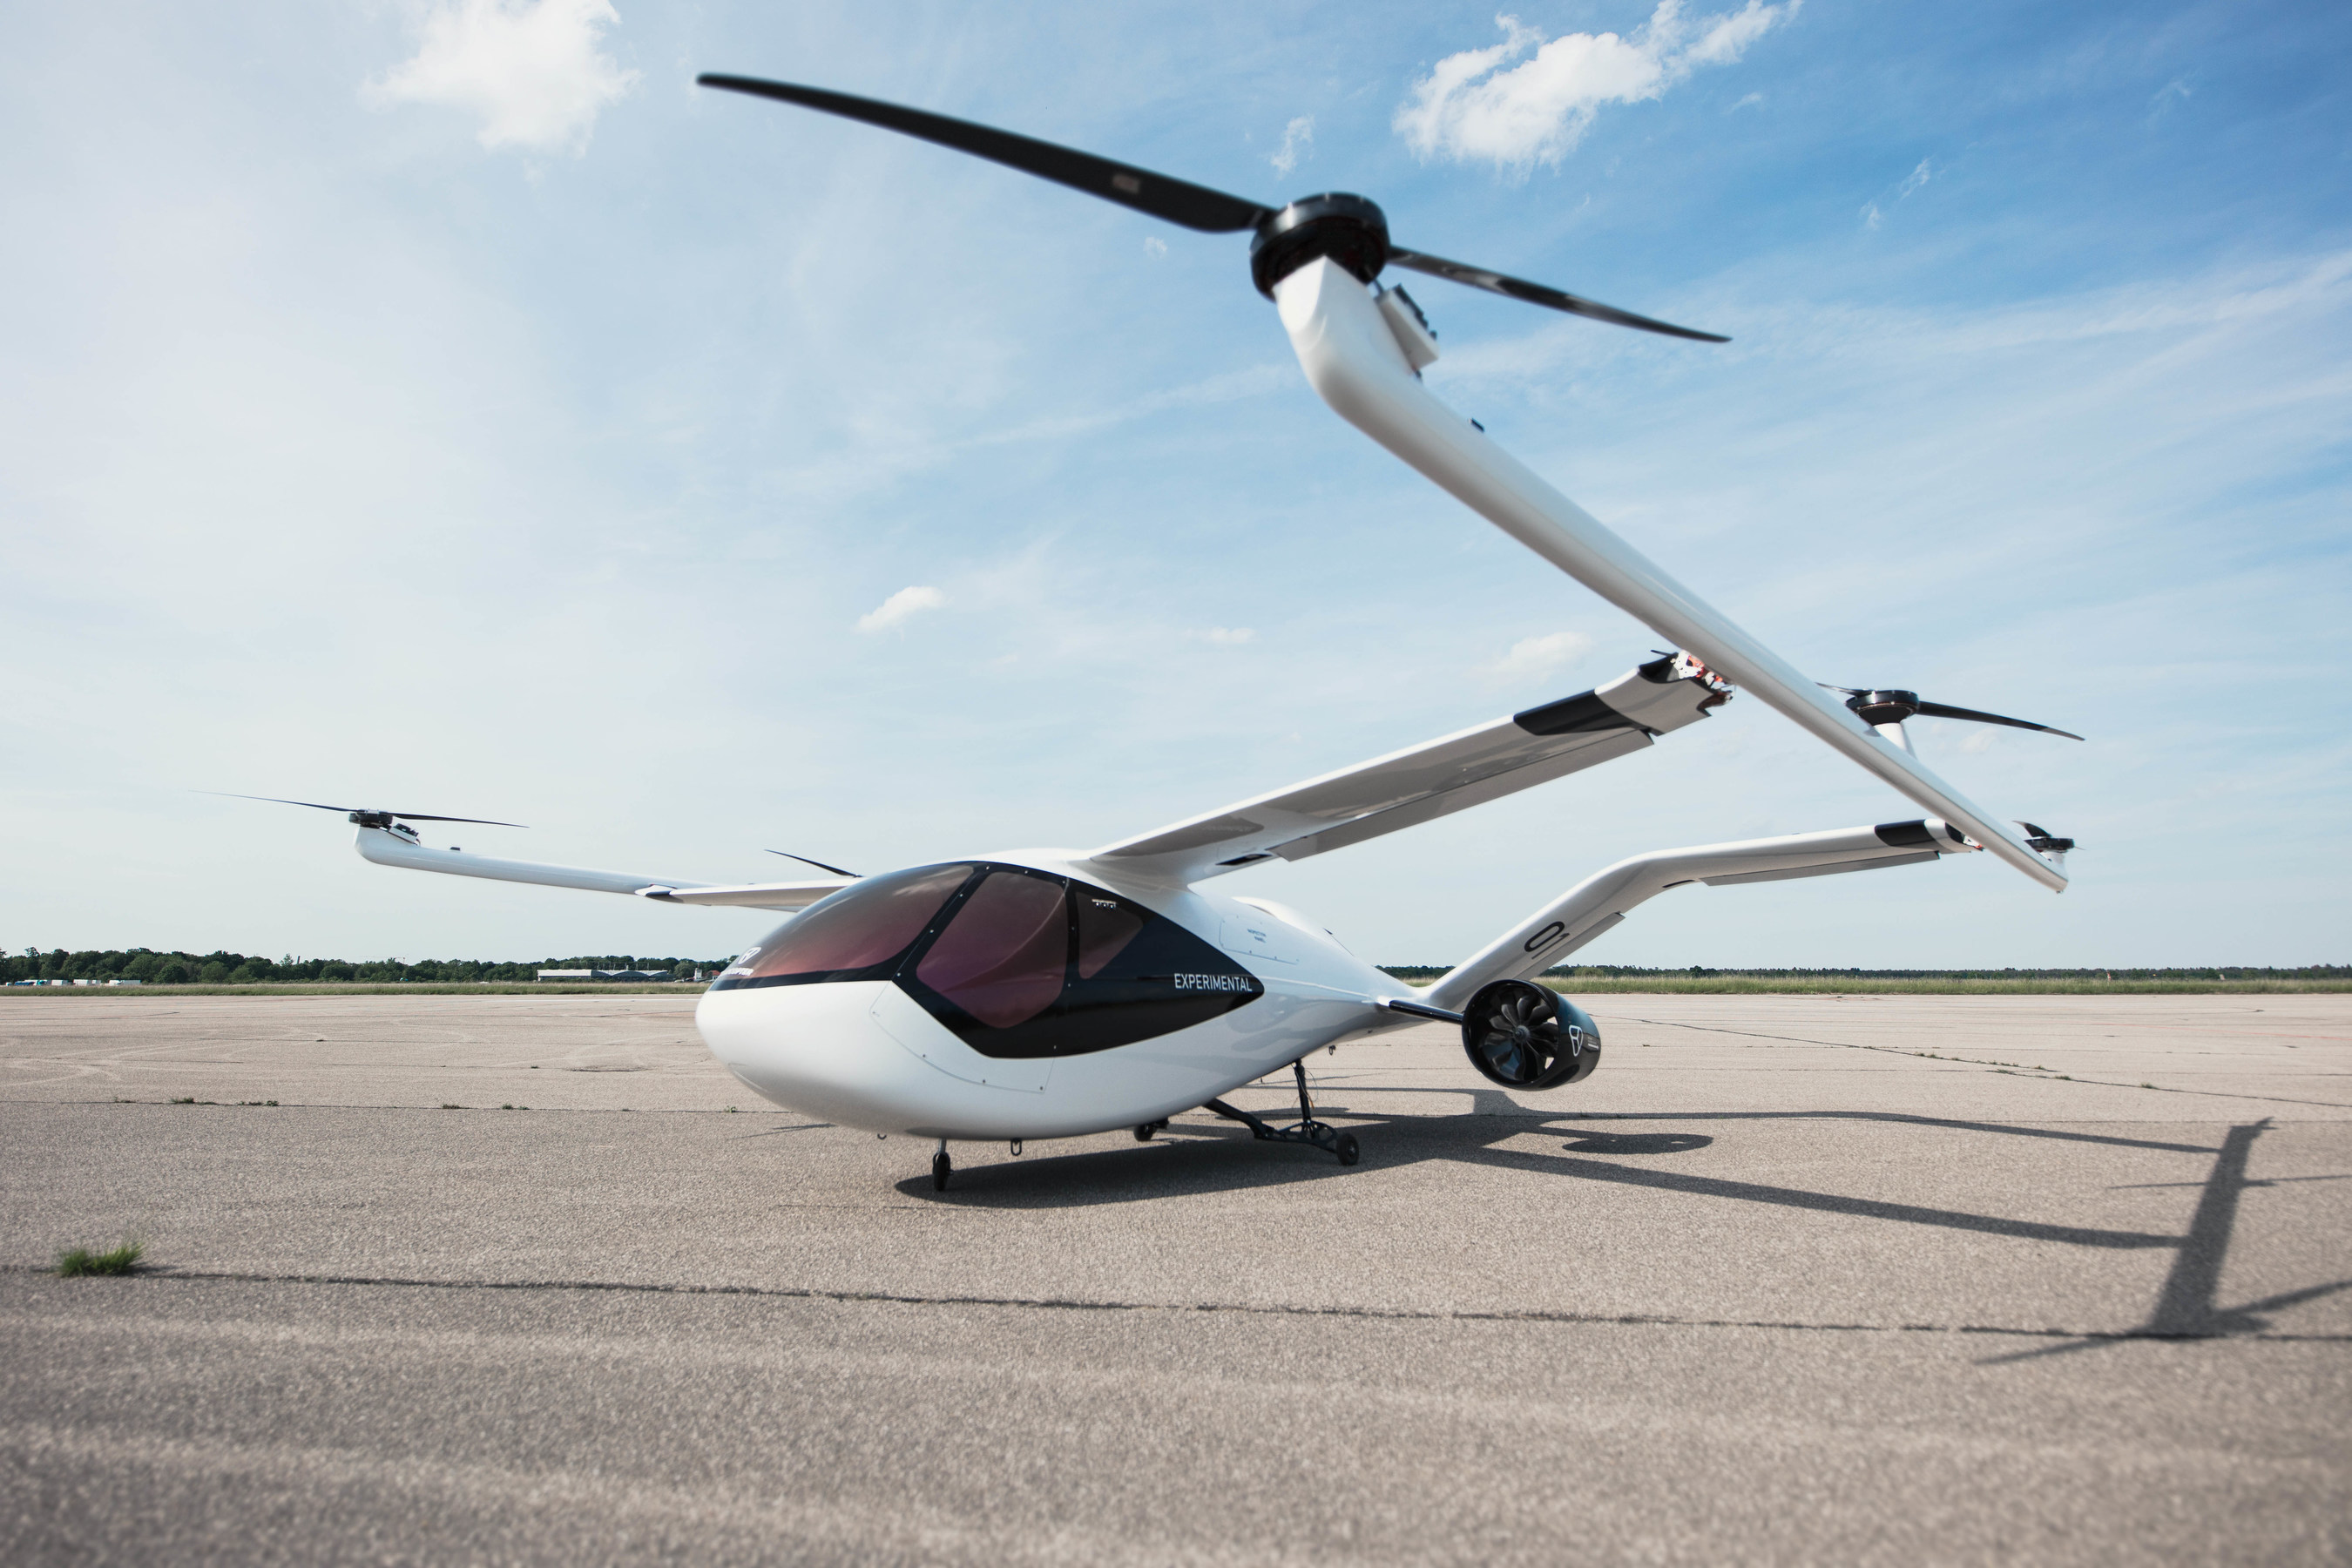 The Volocopter's longer-range drone taxi goes on its first test flights